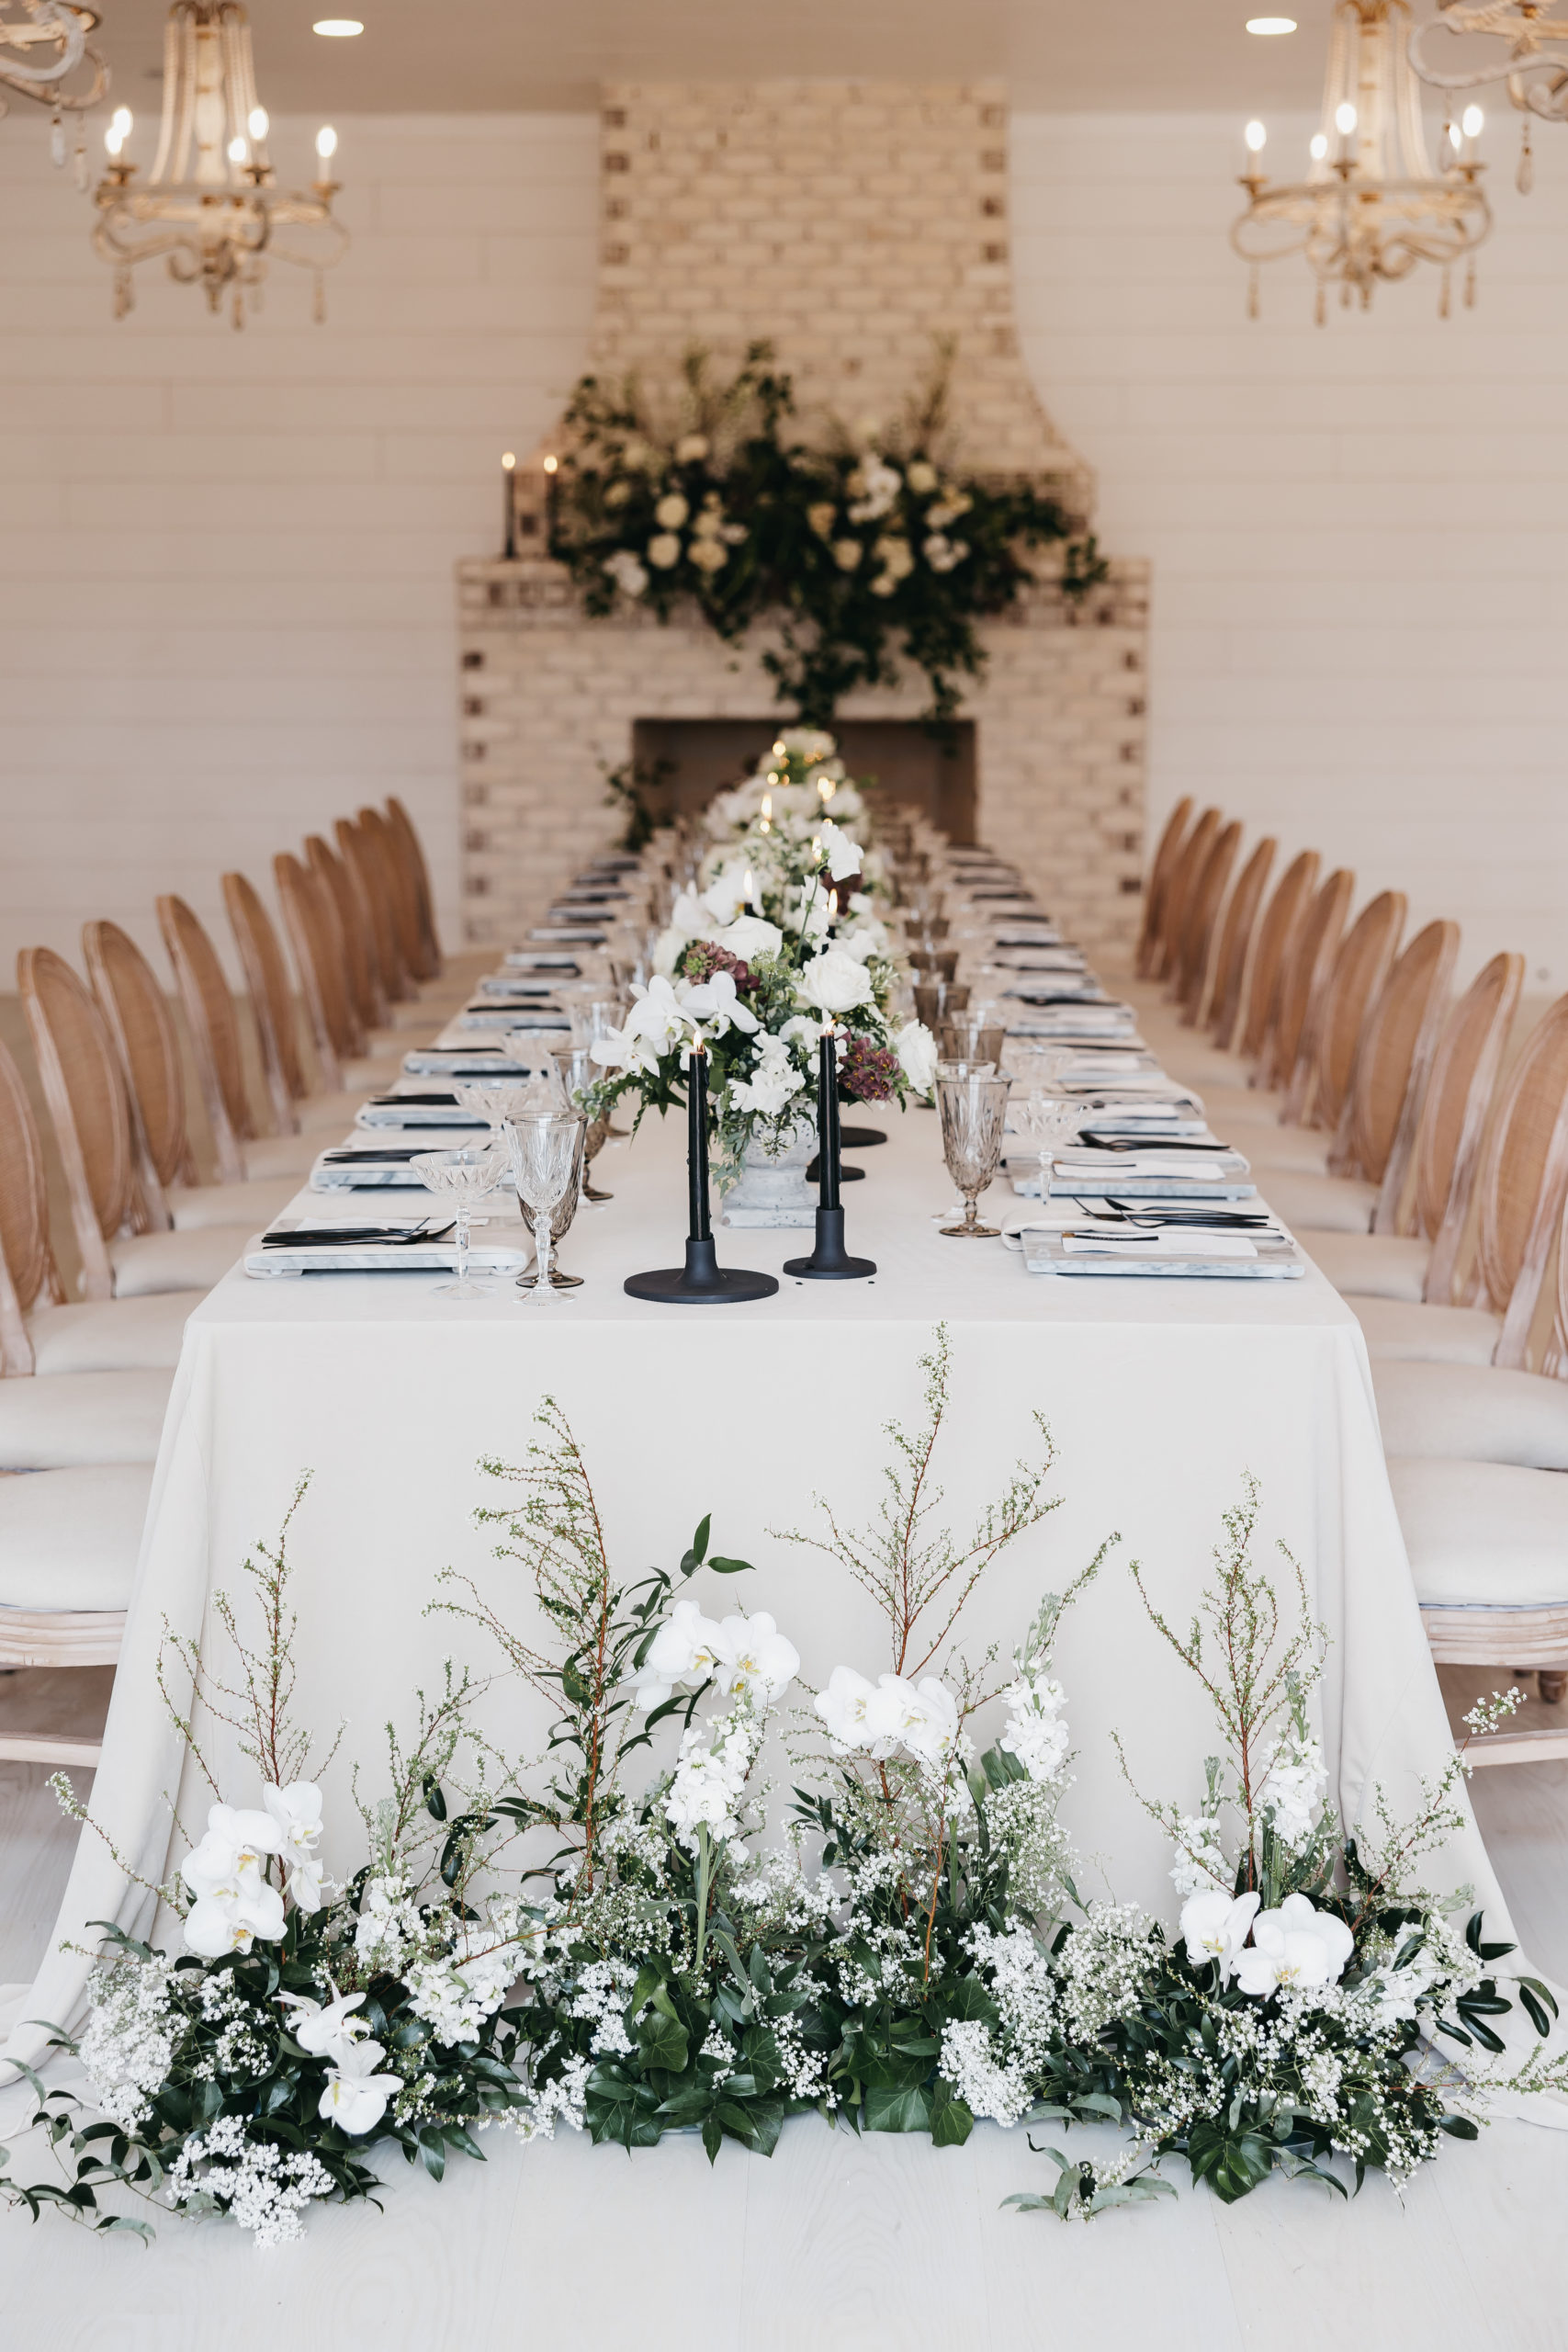 How Much Should A Wedding Photographer Cost. Elegant long table setting at the reception with floral centerpieces.